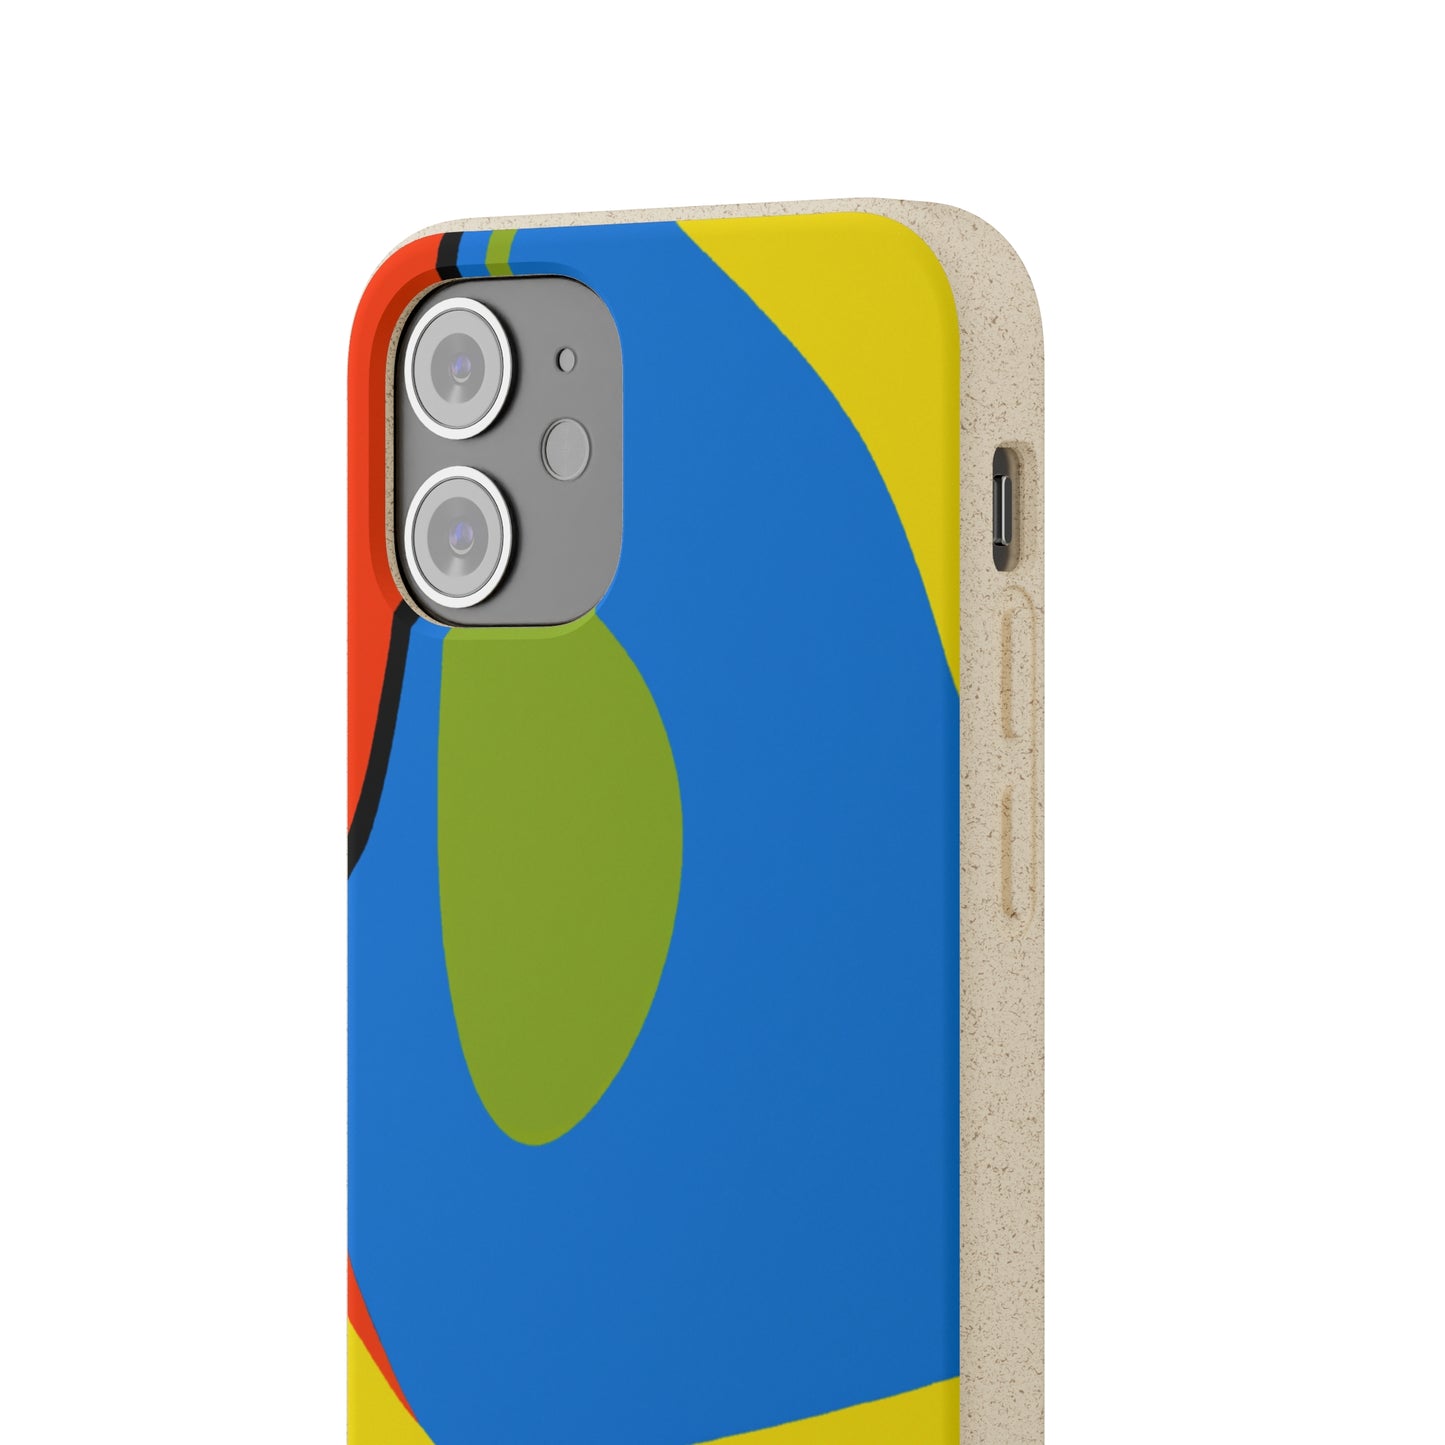 "Mosaic of Self-Expression" - Bam Boo! Lifestyle Eco-friendly Cases